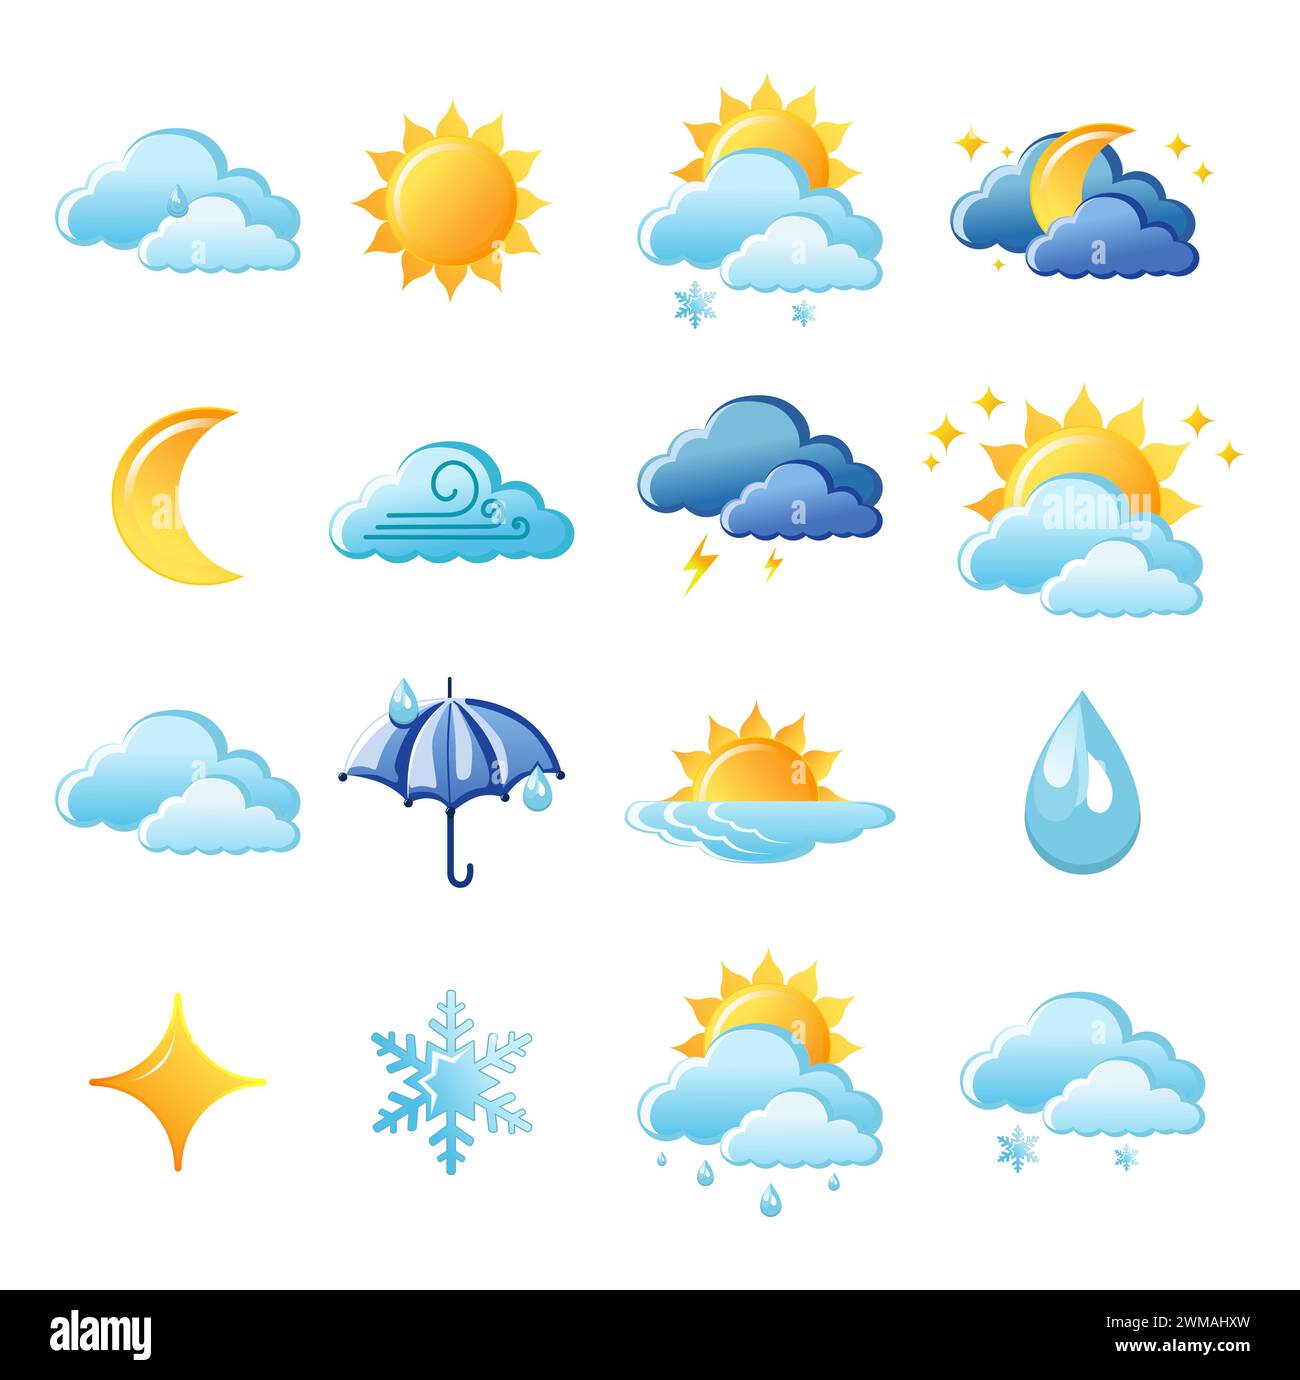 Cute vector set of isolated weather app icon with cloud, sun, snow, rain, lightning, moon and star. Interface elements in flat design. Minimal cartoon Stock Vector